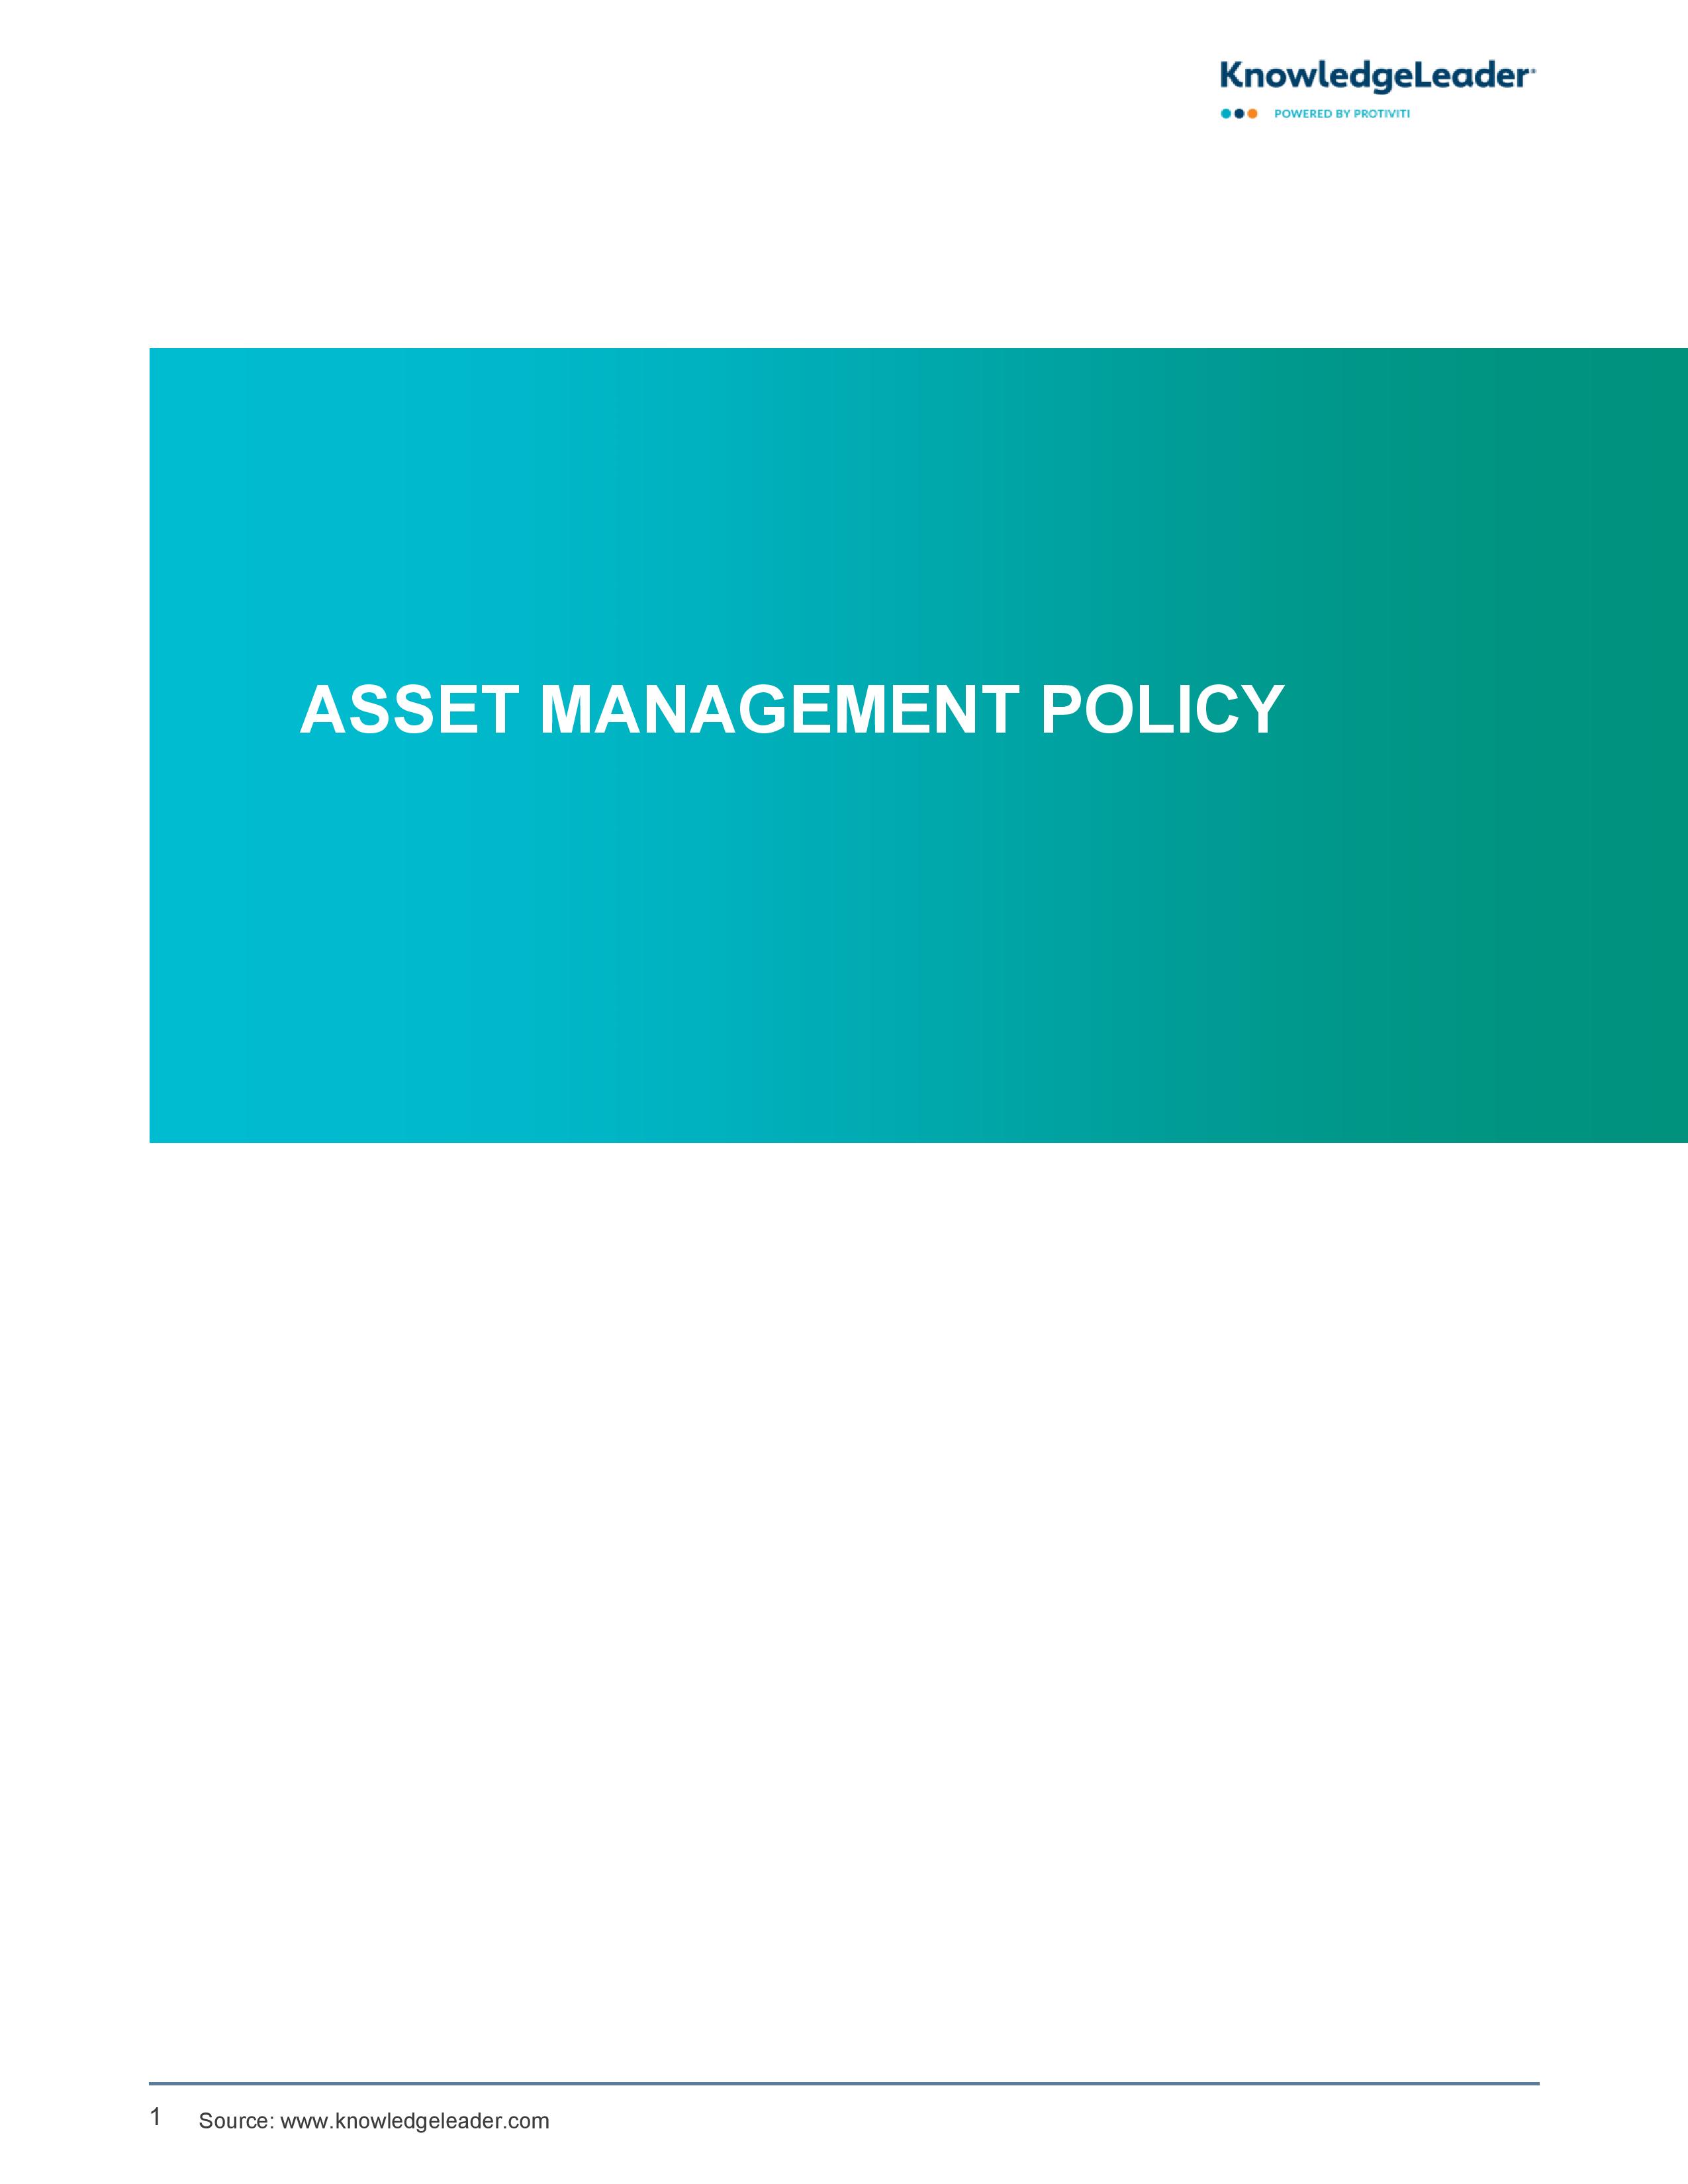 screenshot of the first page of the asset management policy